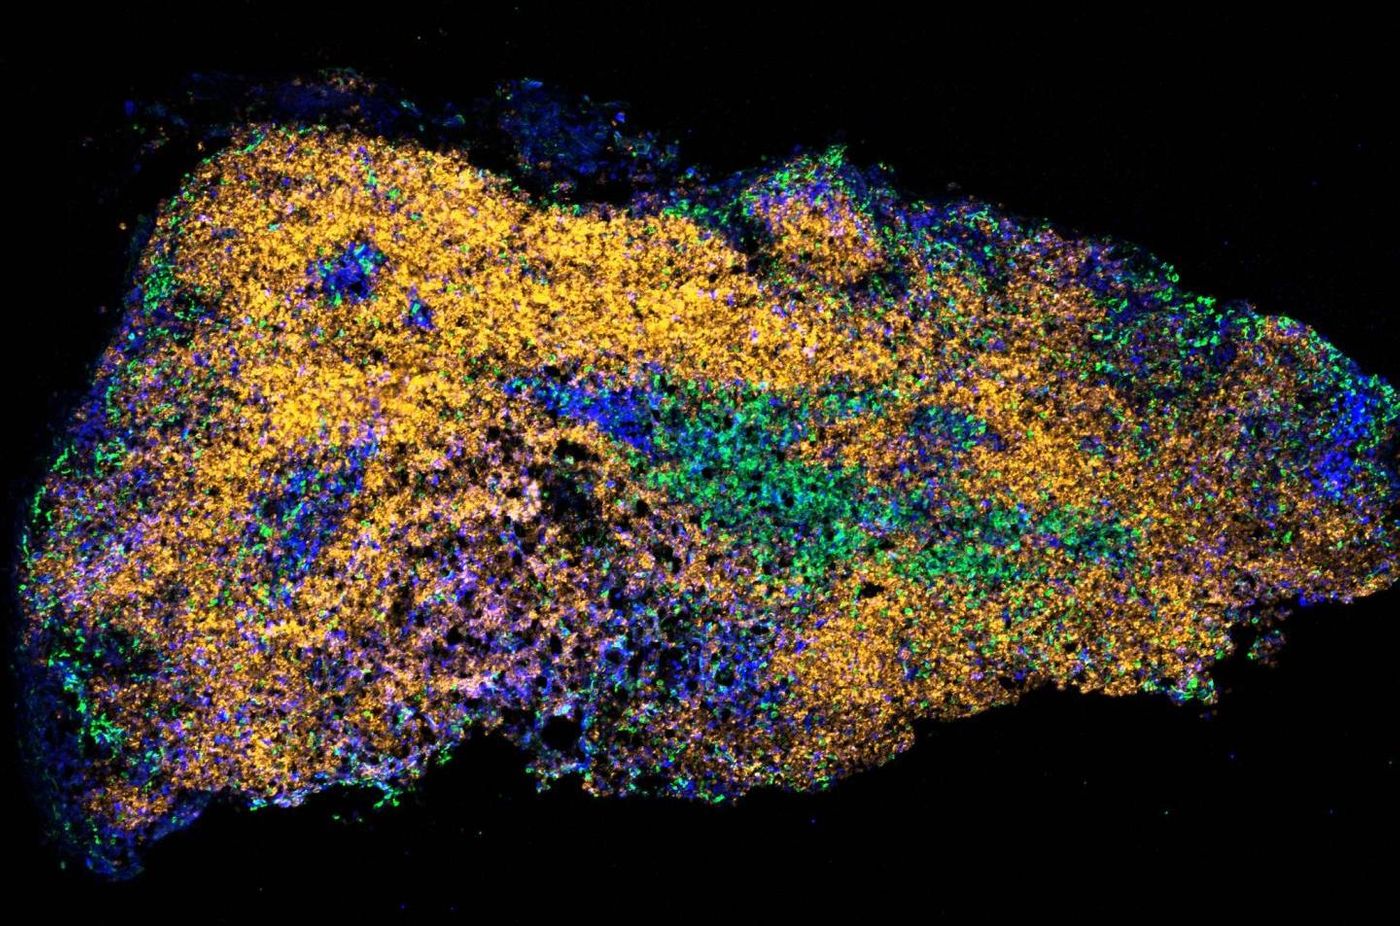 A mouse lymph node from an aged mouse 14 days after immunization. B cell follicles are yellow (IgD) and proliferating germinal centre cells (blue) are shown within the B cell follicle. T cells are green. / Credit: Babraham Institute